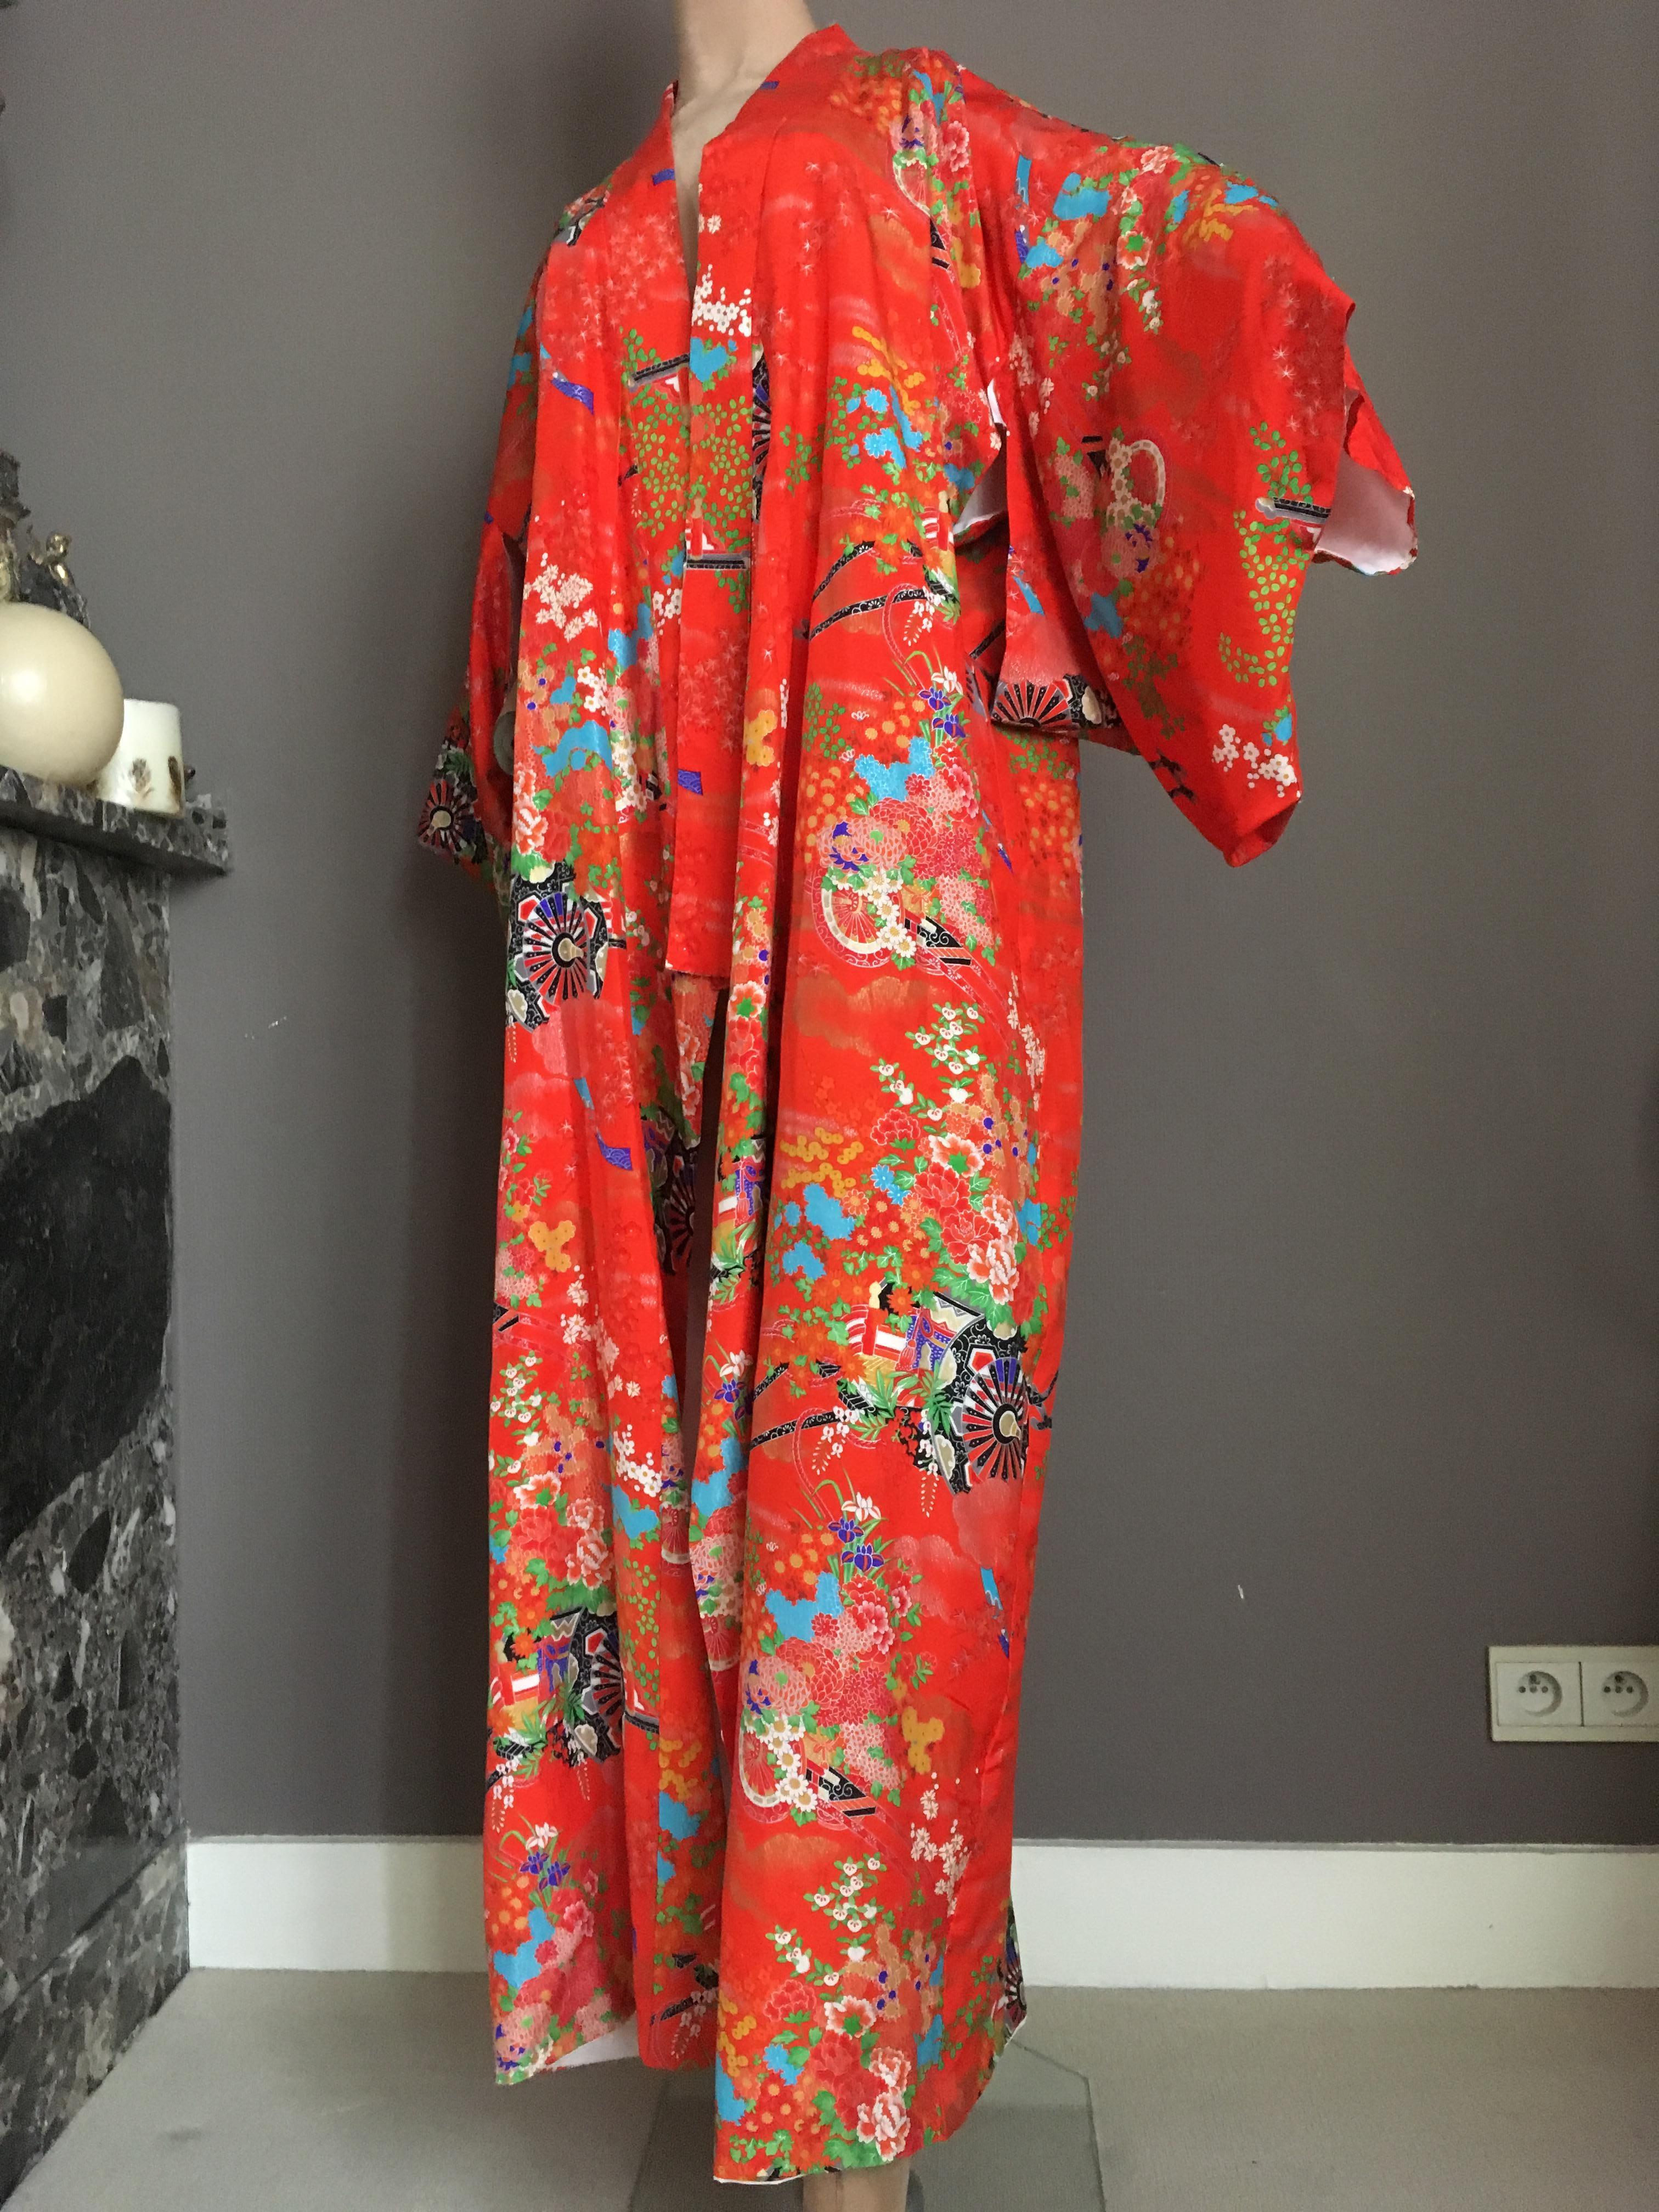 Ichiban Lounge Kimono made in japan,1960s soft, silk kimono robe with a print in orange,white,blue and black colors representation of a Japanese flower garden and symbols compiled into a naturally stylish Kimono to wear.

Kimonos are perfect for